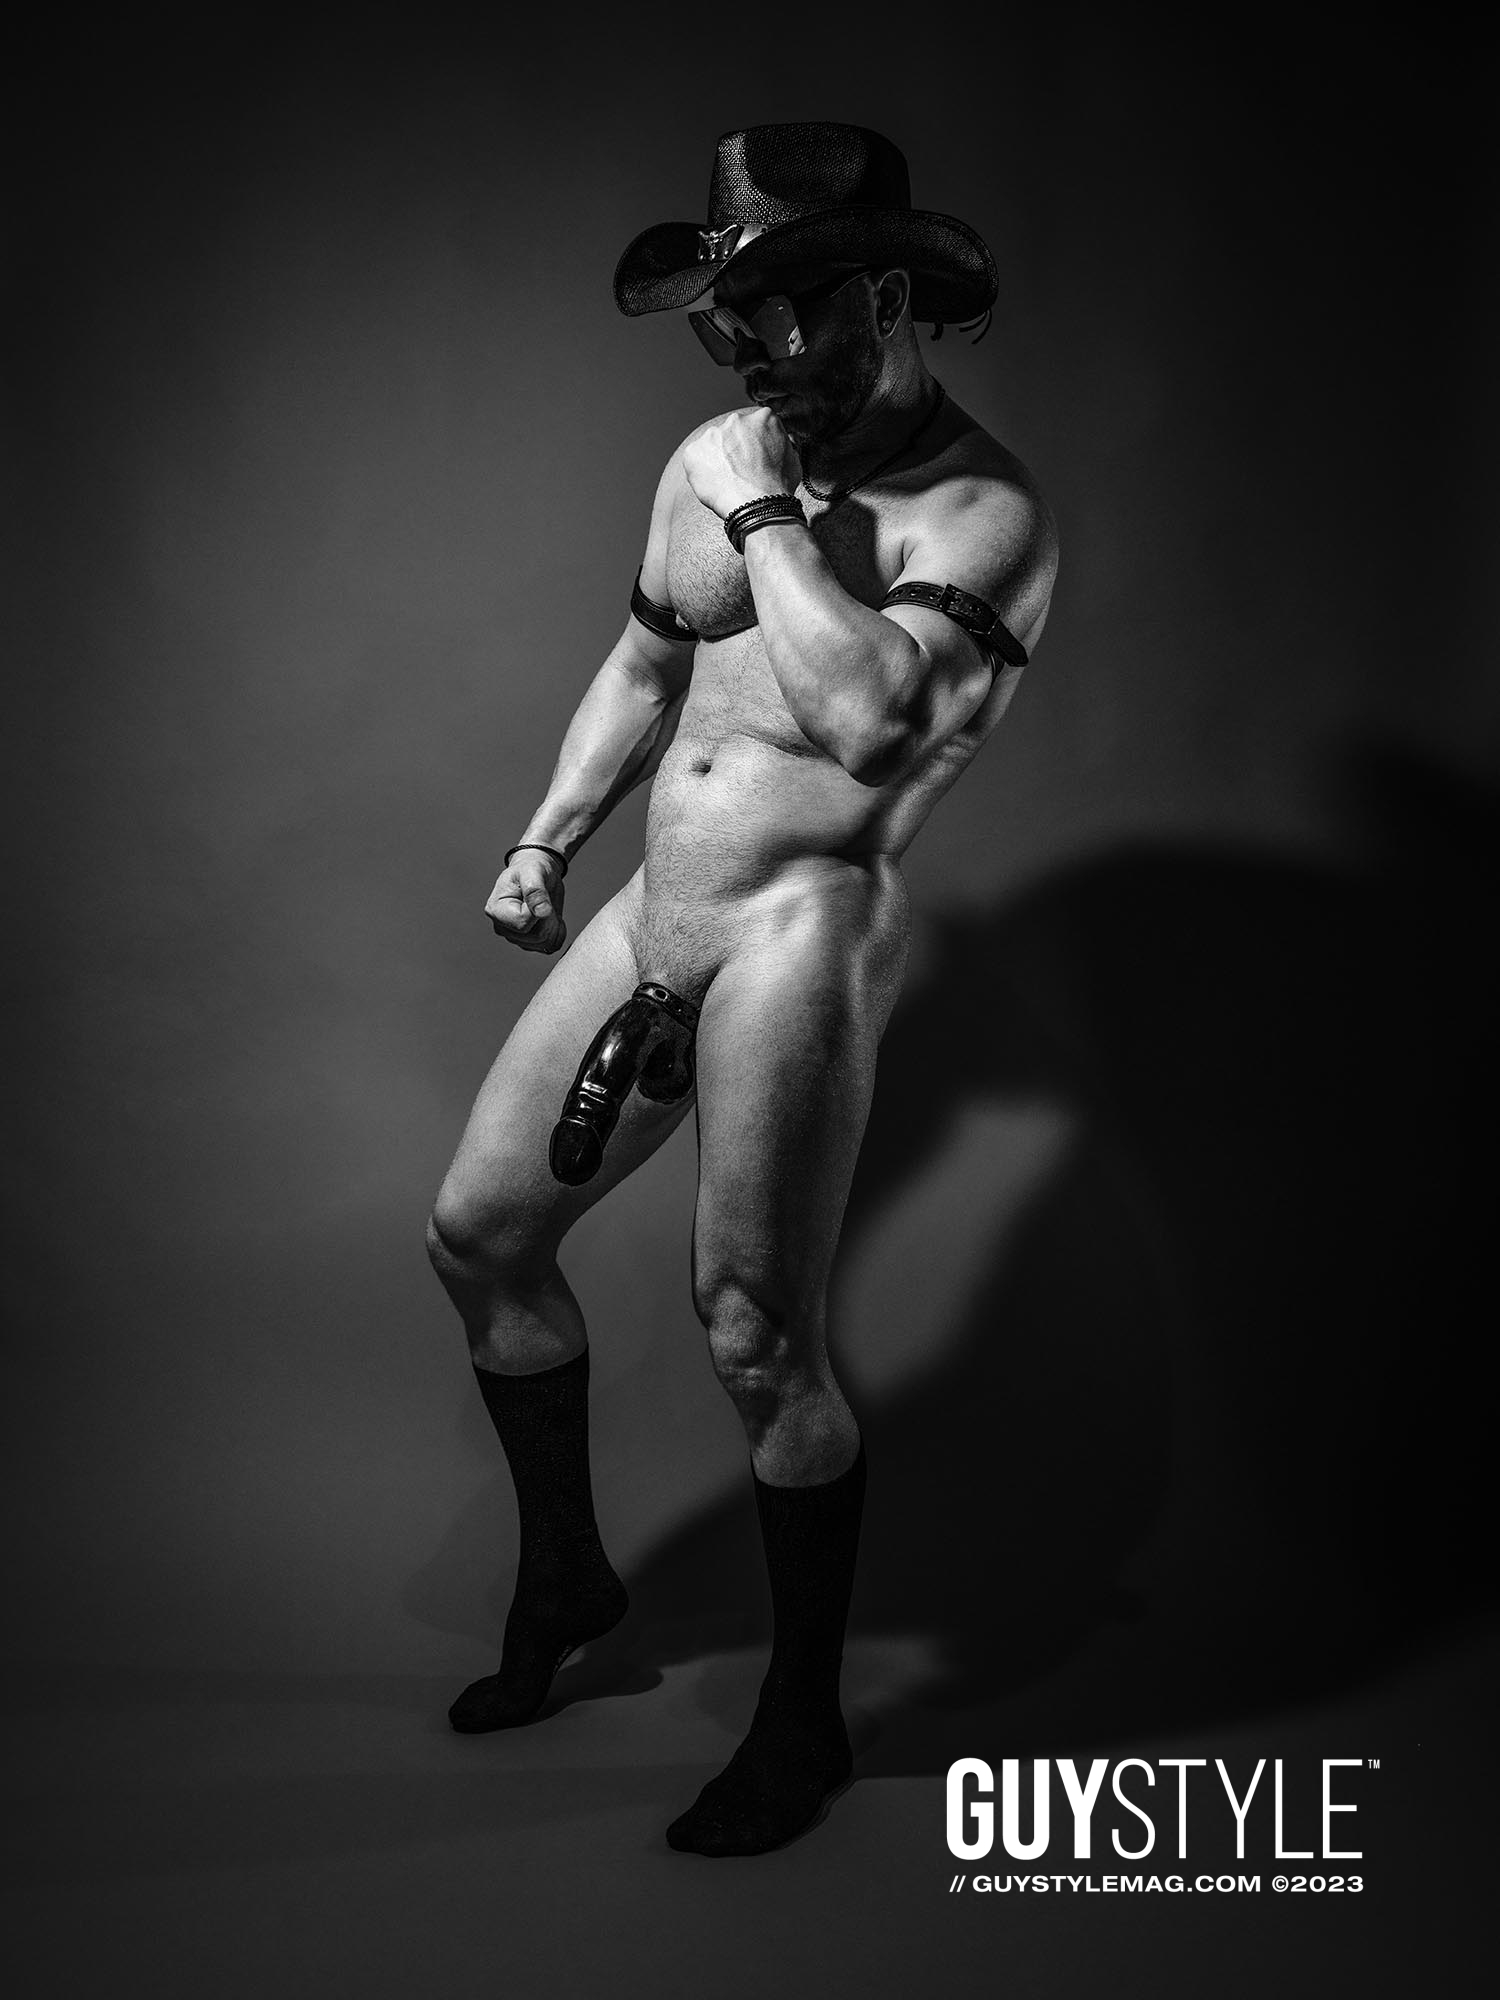 Red, Black, and Daring: Maxwell Alexander's Queer Art Extravaganza ft. Cocky Cowboy – Presented by HARD NEW YORK – The Best Homoerotic Art Prints on Canvas – Best Men's Boudoir NYC – Nude Male Photography – New York Gay Artist